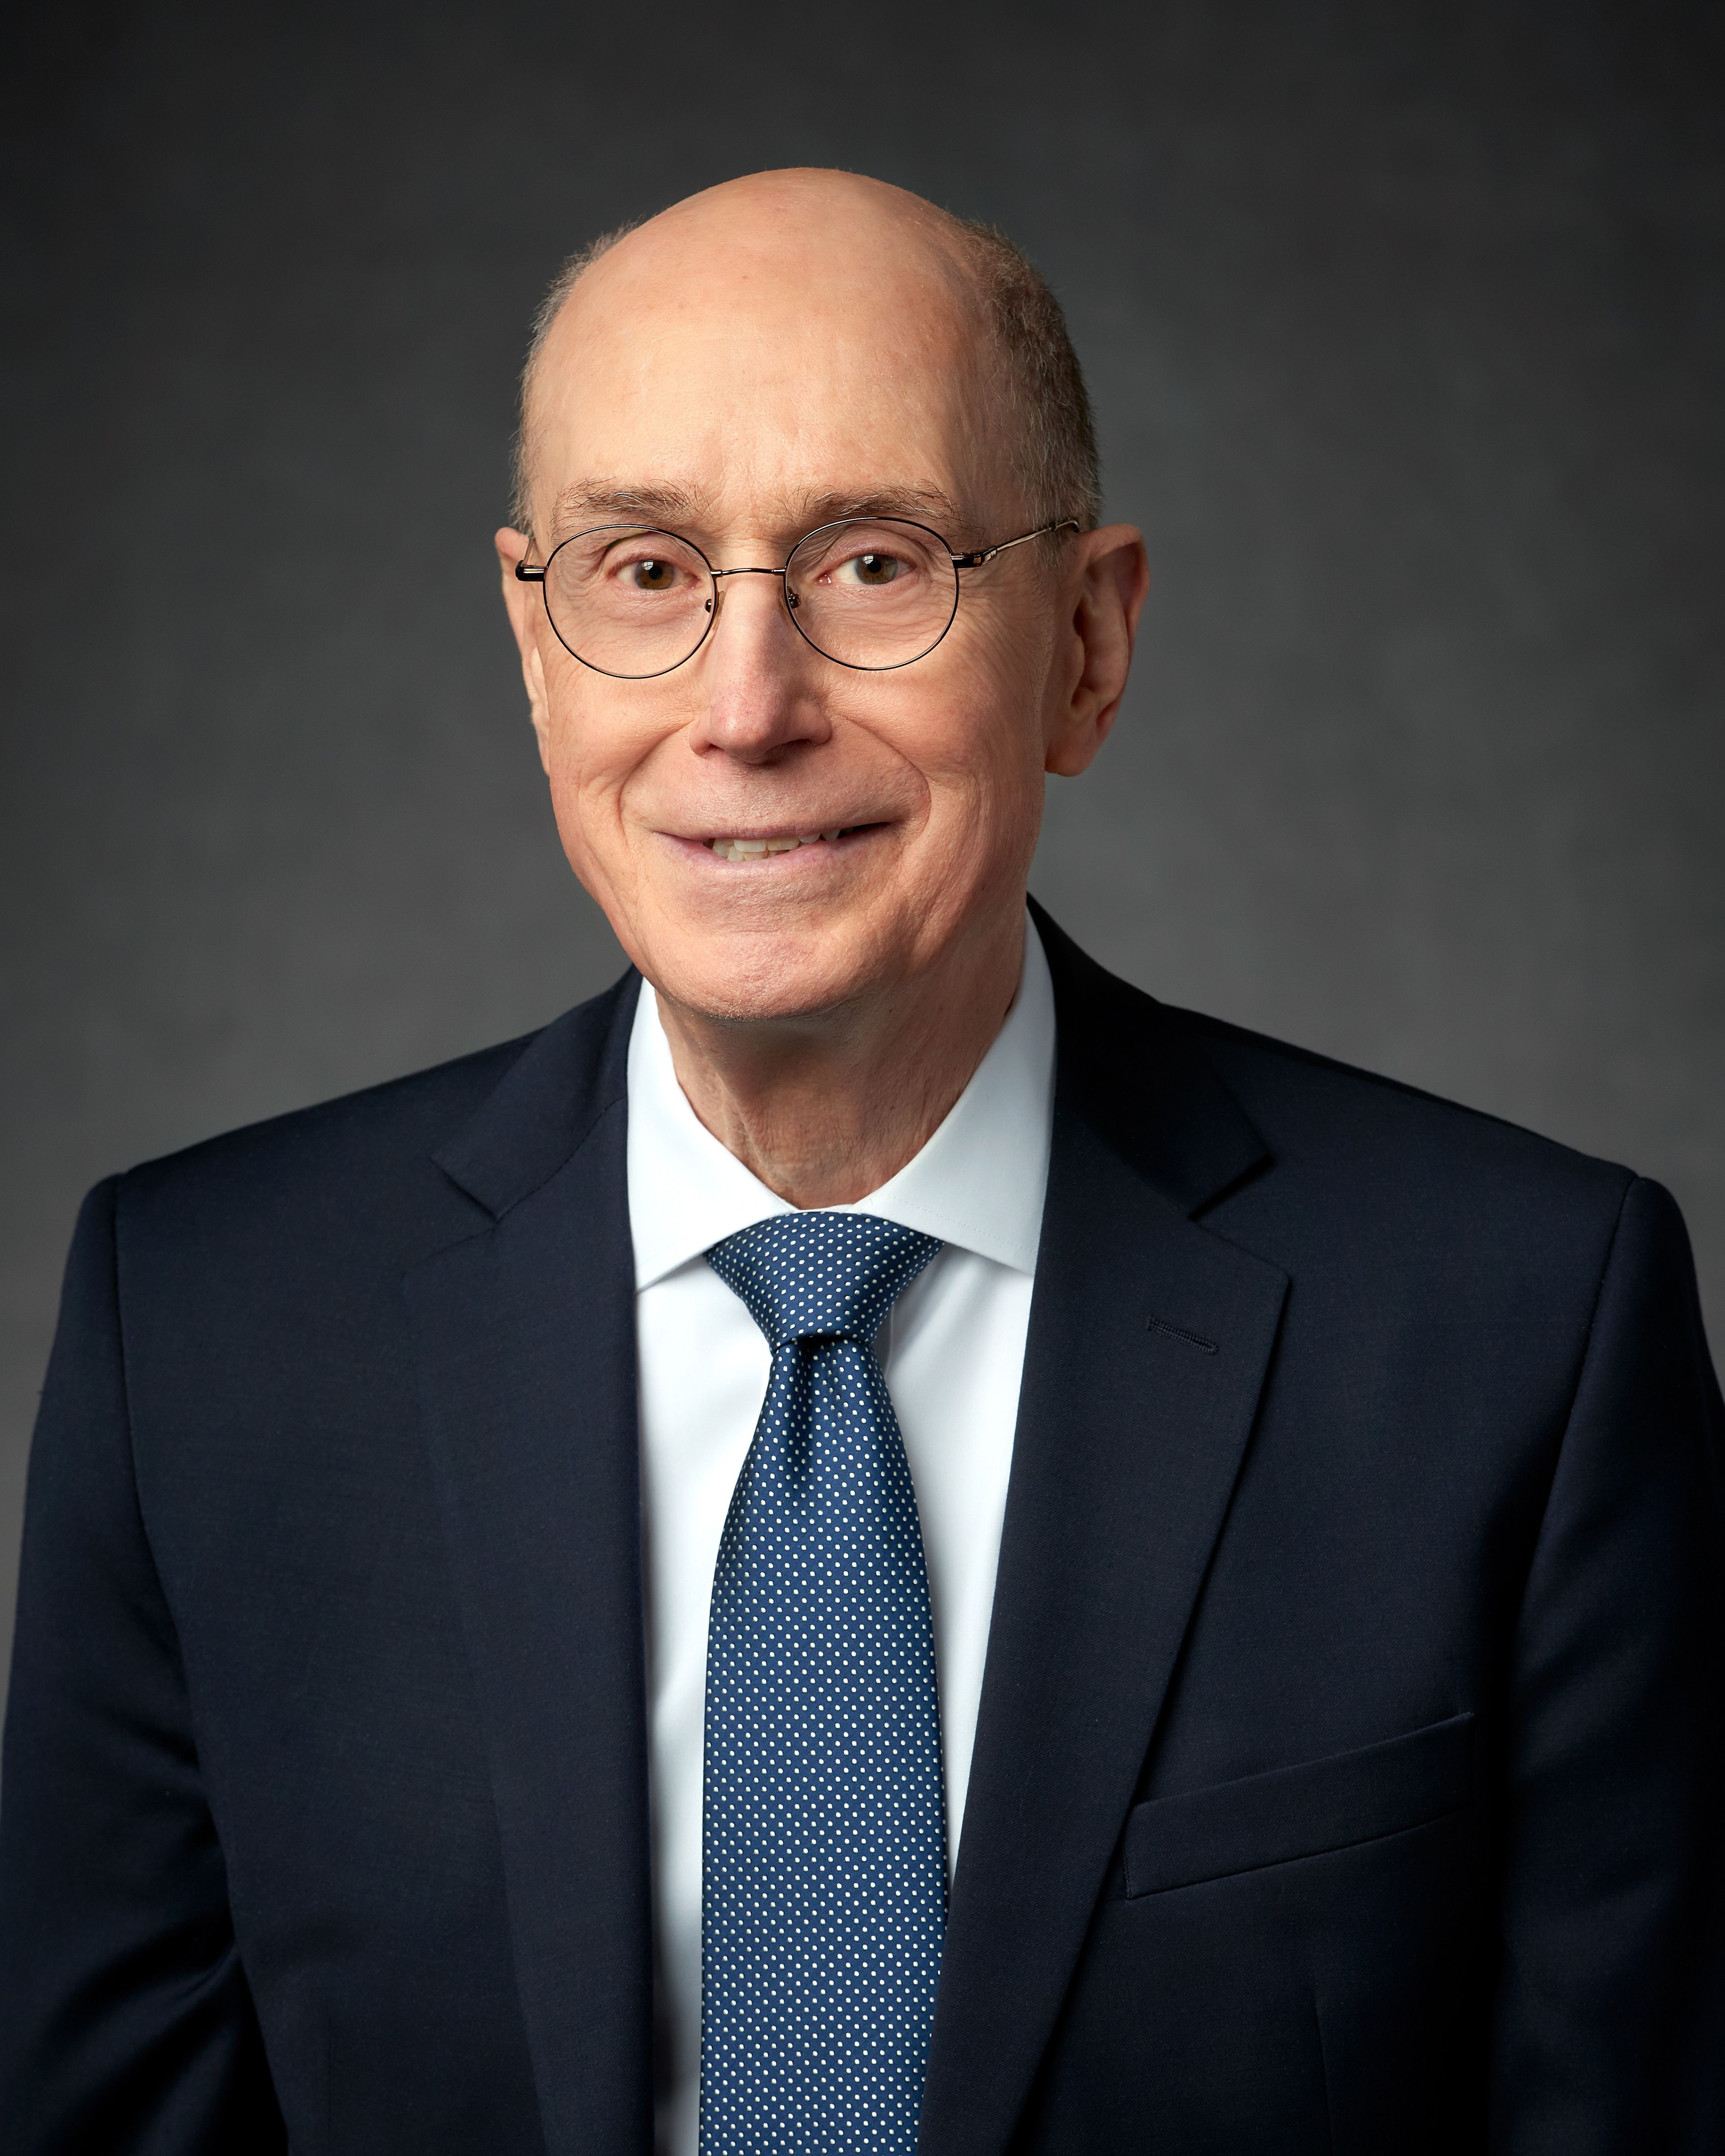 The Official Portrait Henry B. Eyring.